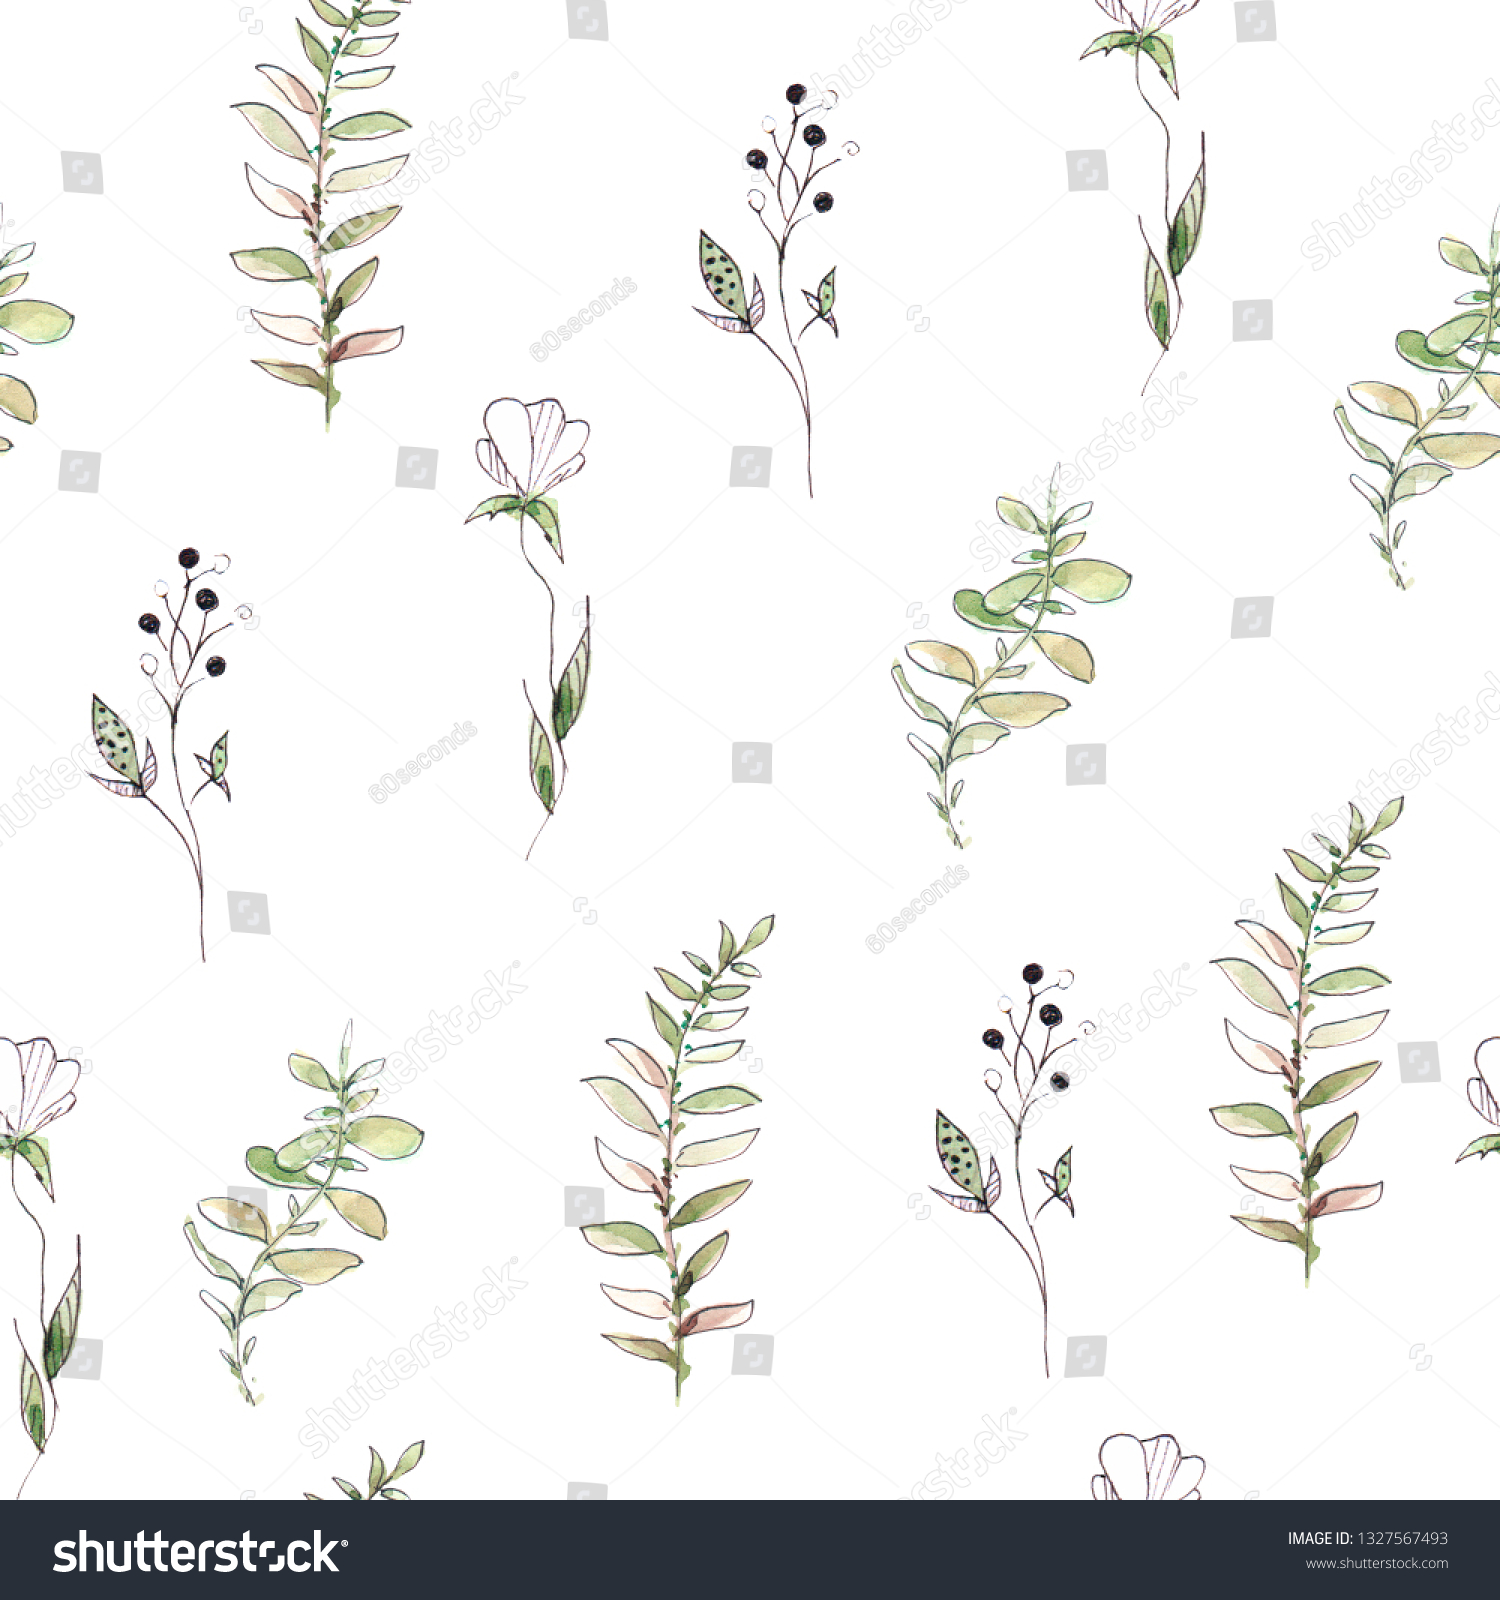 Hand drawing watercolor spring pattern of  leaves and branches. illustration isolated on white #1327567493